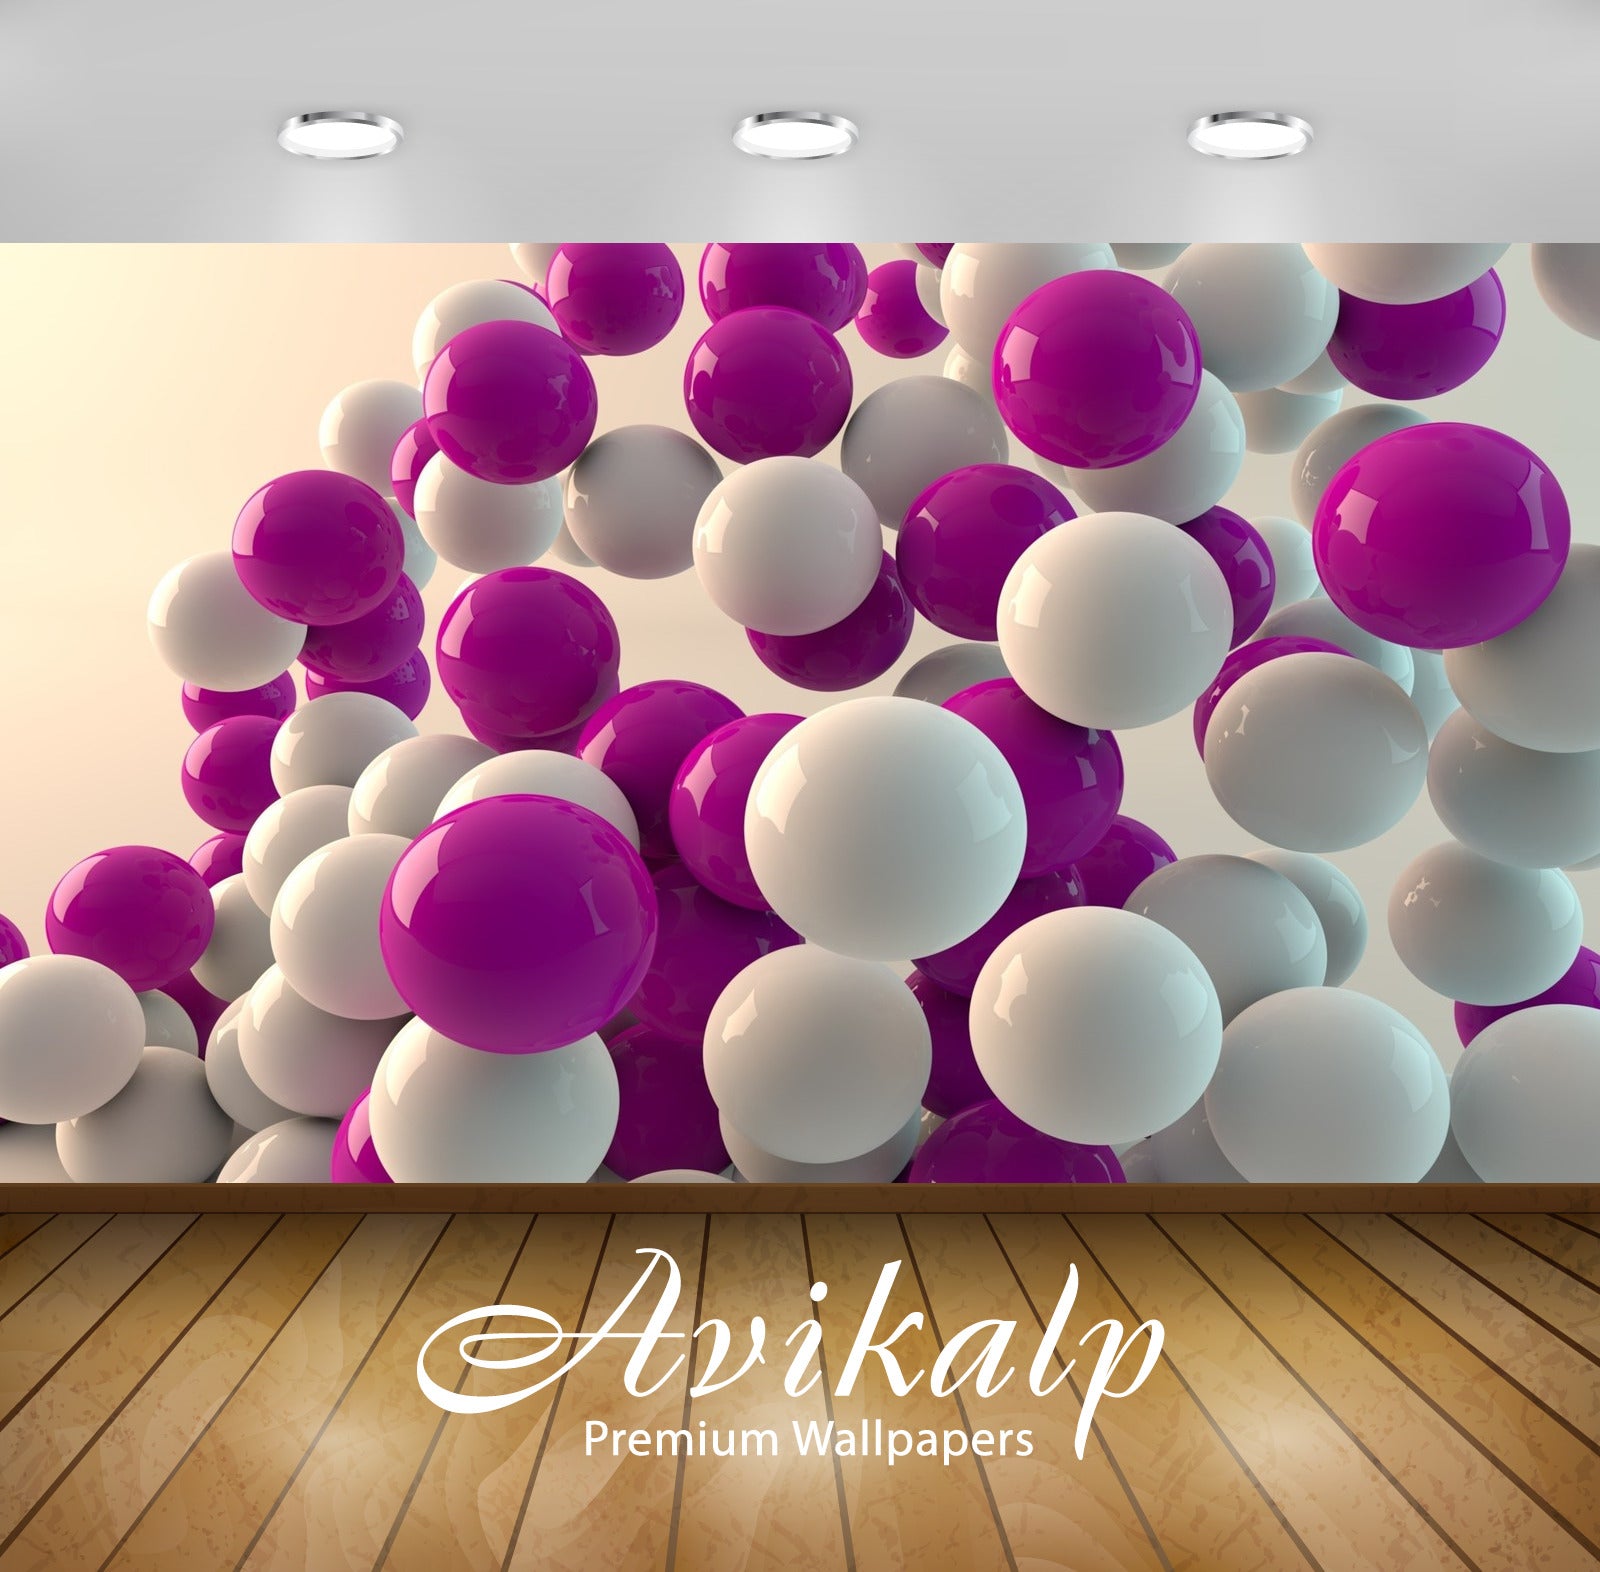 Avikalp Exclusive Awi1281 Purple White Balloons Full HD Wallpapers for Living room, Hall, Kids Room,